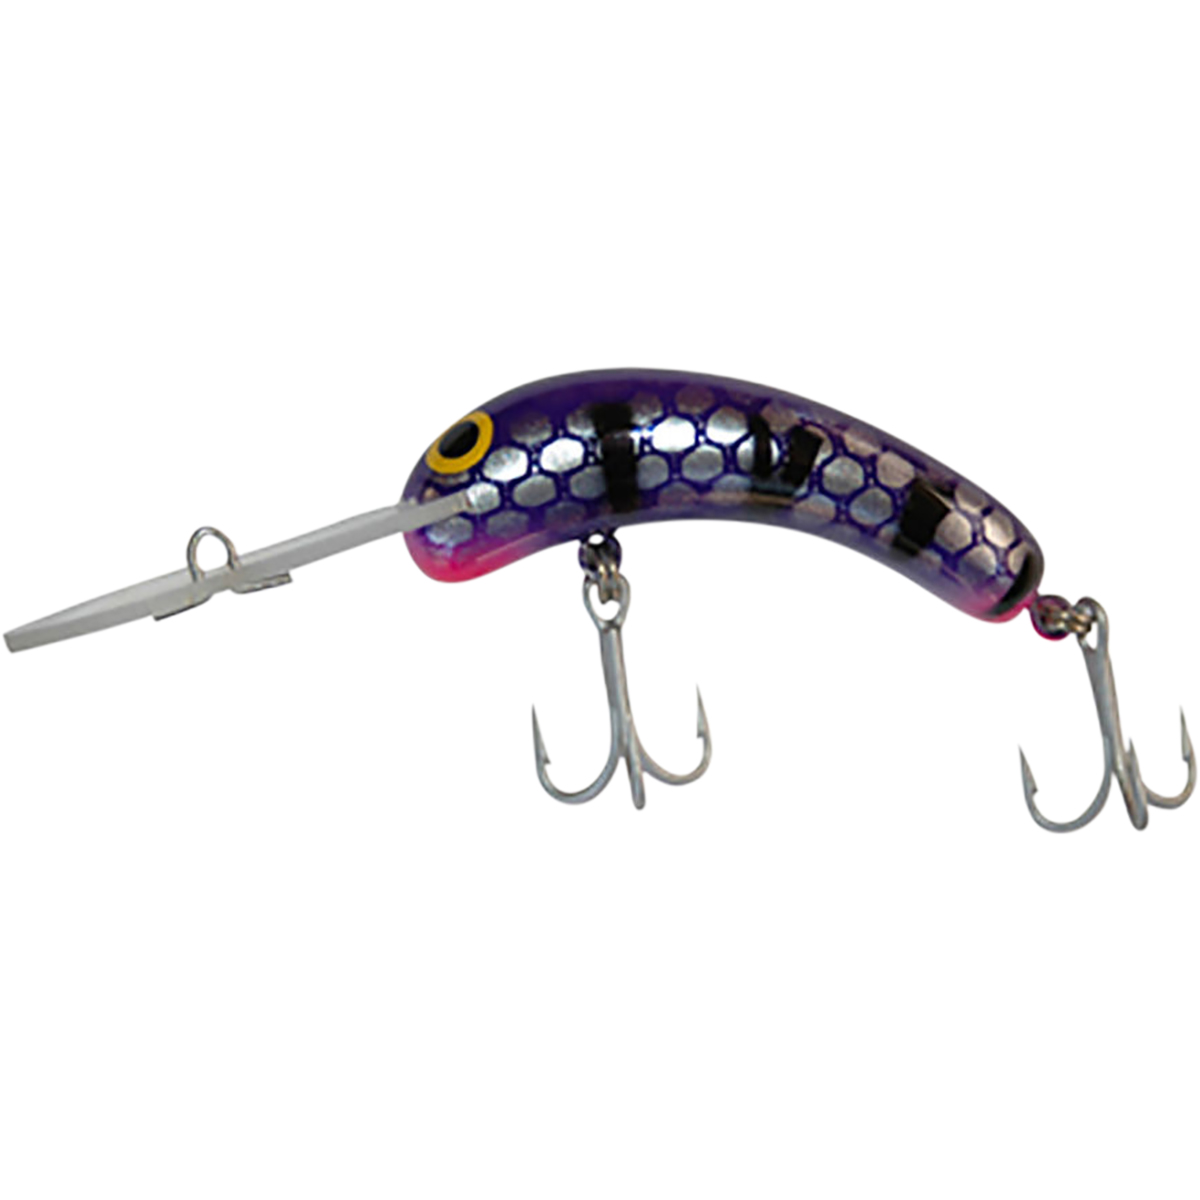 Australian Crafted Lures Invader Hard Body Lure 70mm Colour 66